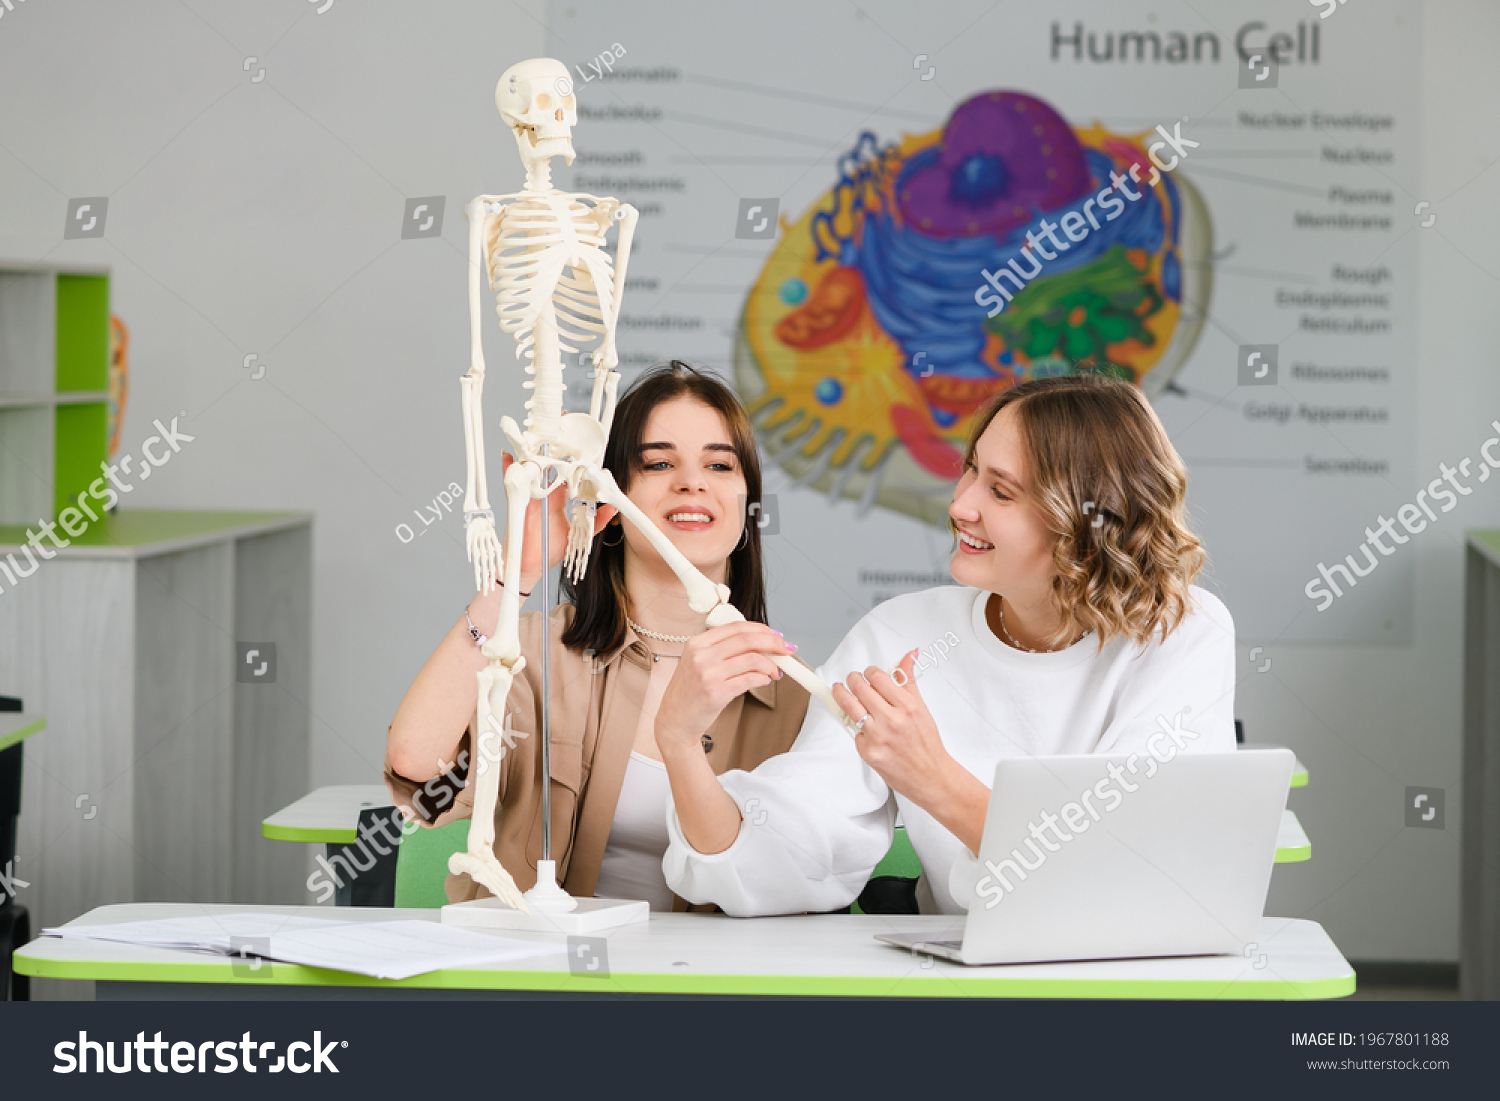 Two beautiful high school students study biology with human skeleton model and laptop at desk of modern classroom #1967801188